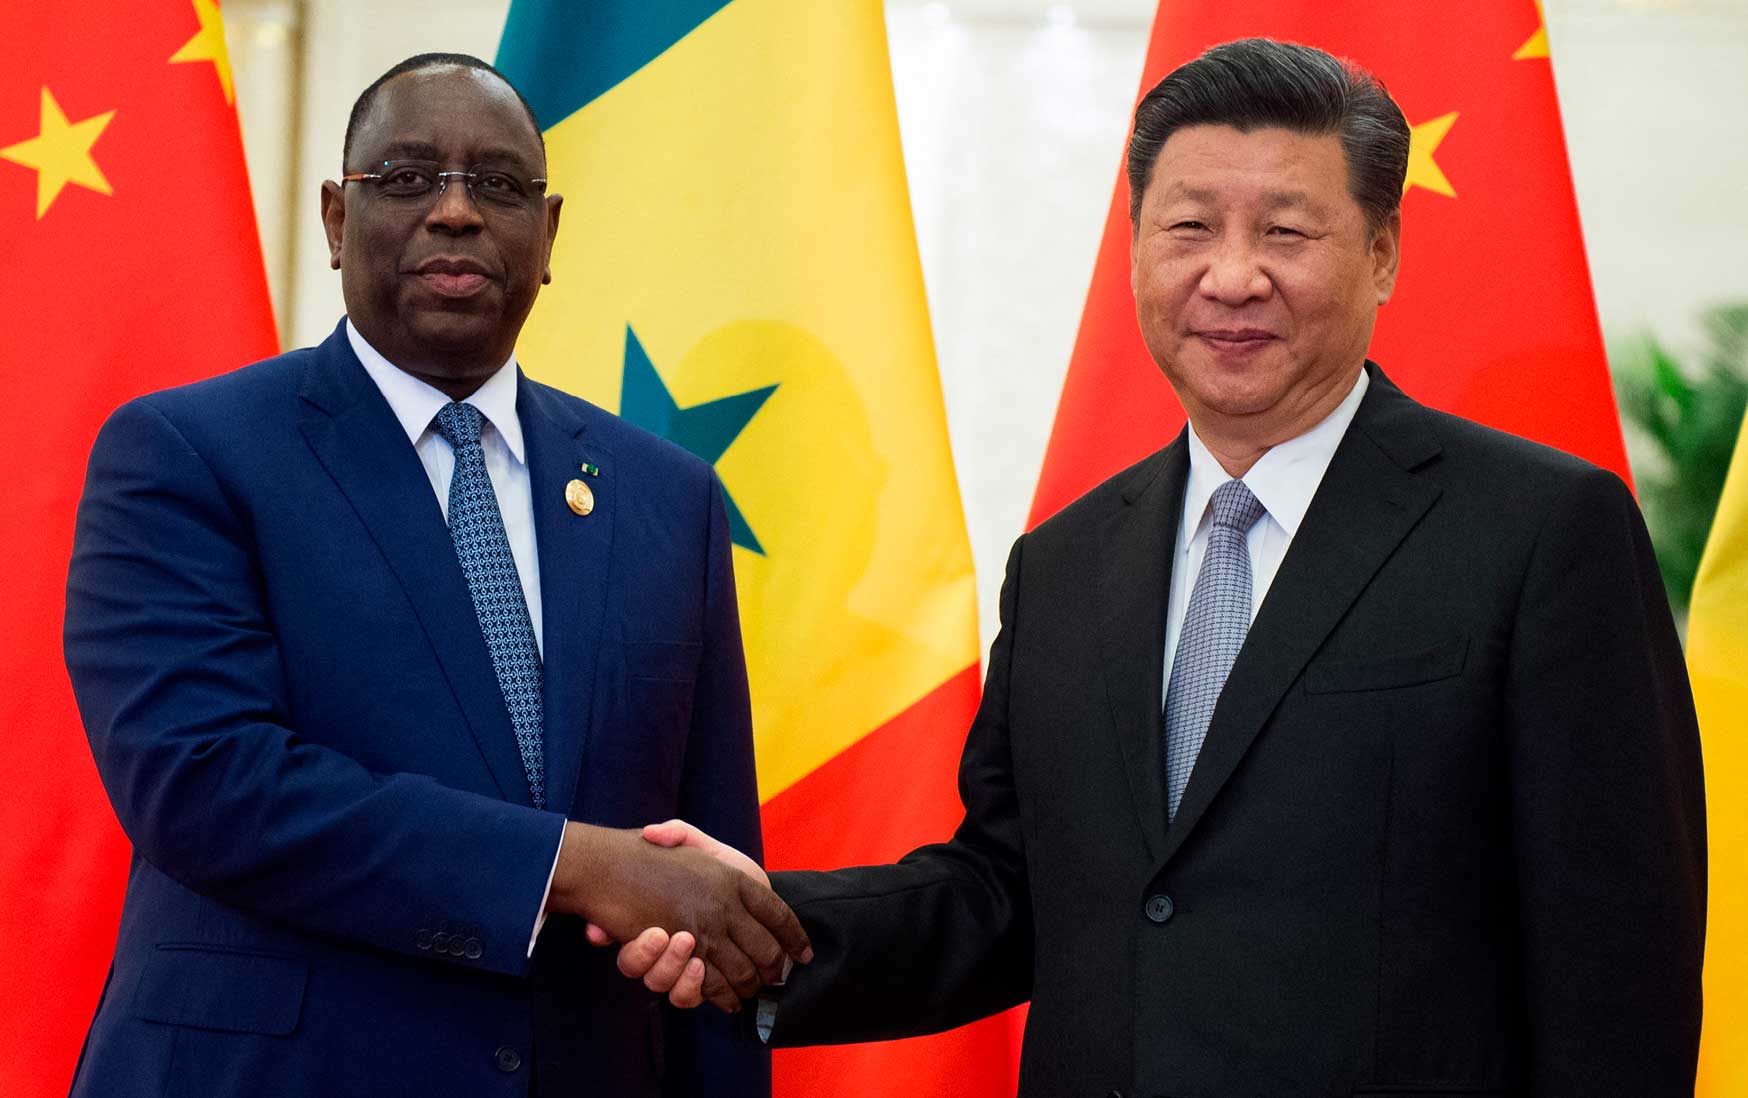 President Macky Sall shakes hands with China's President Xi Jinping